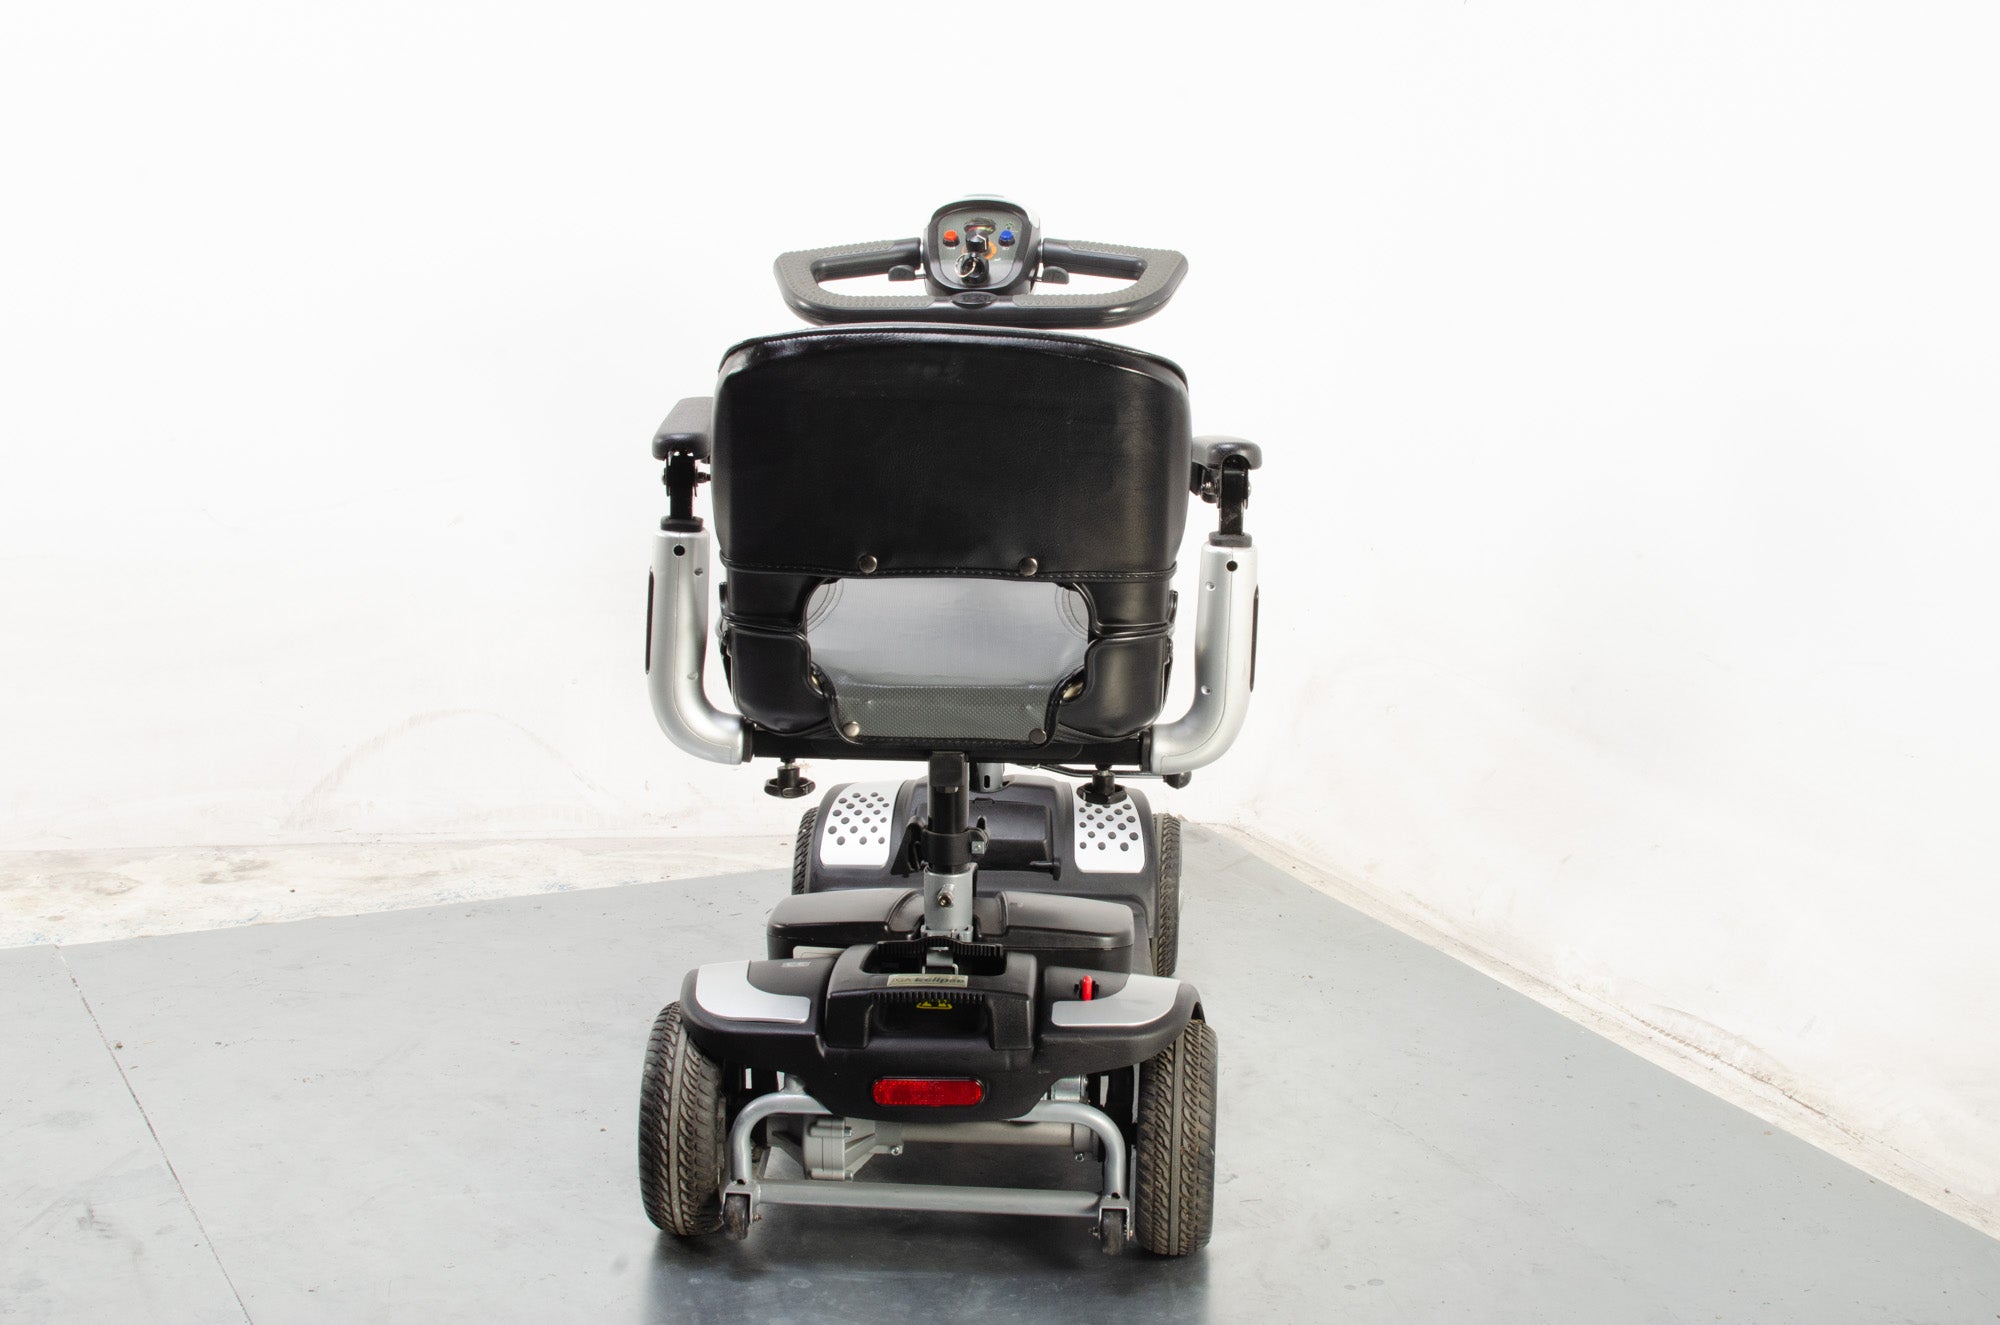 TGA Eclipse Used Electric Mobility Scooter Transportable Boot Folding Lightweight Small